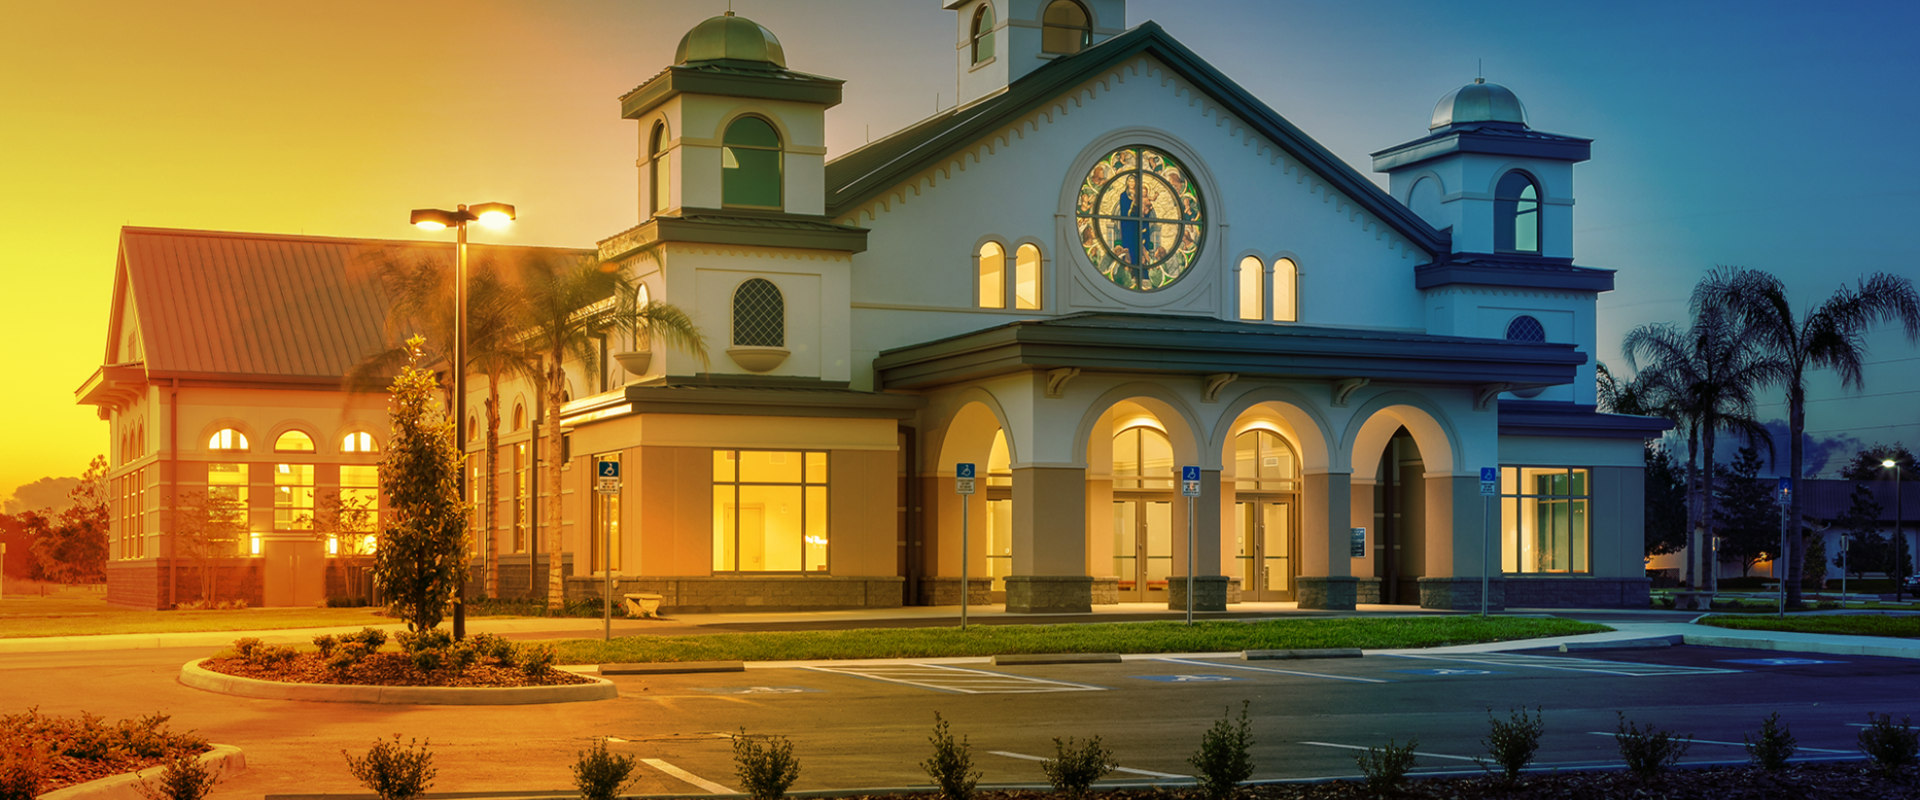 Alternative Churches in Bradenton, Florida: Find the Perfect Place for You